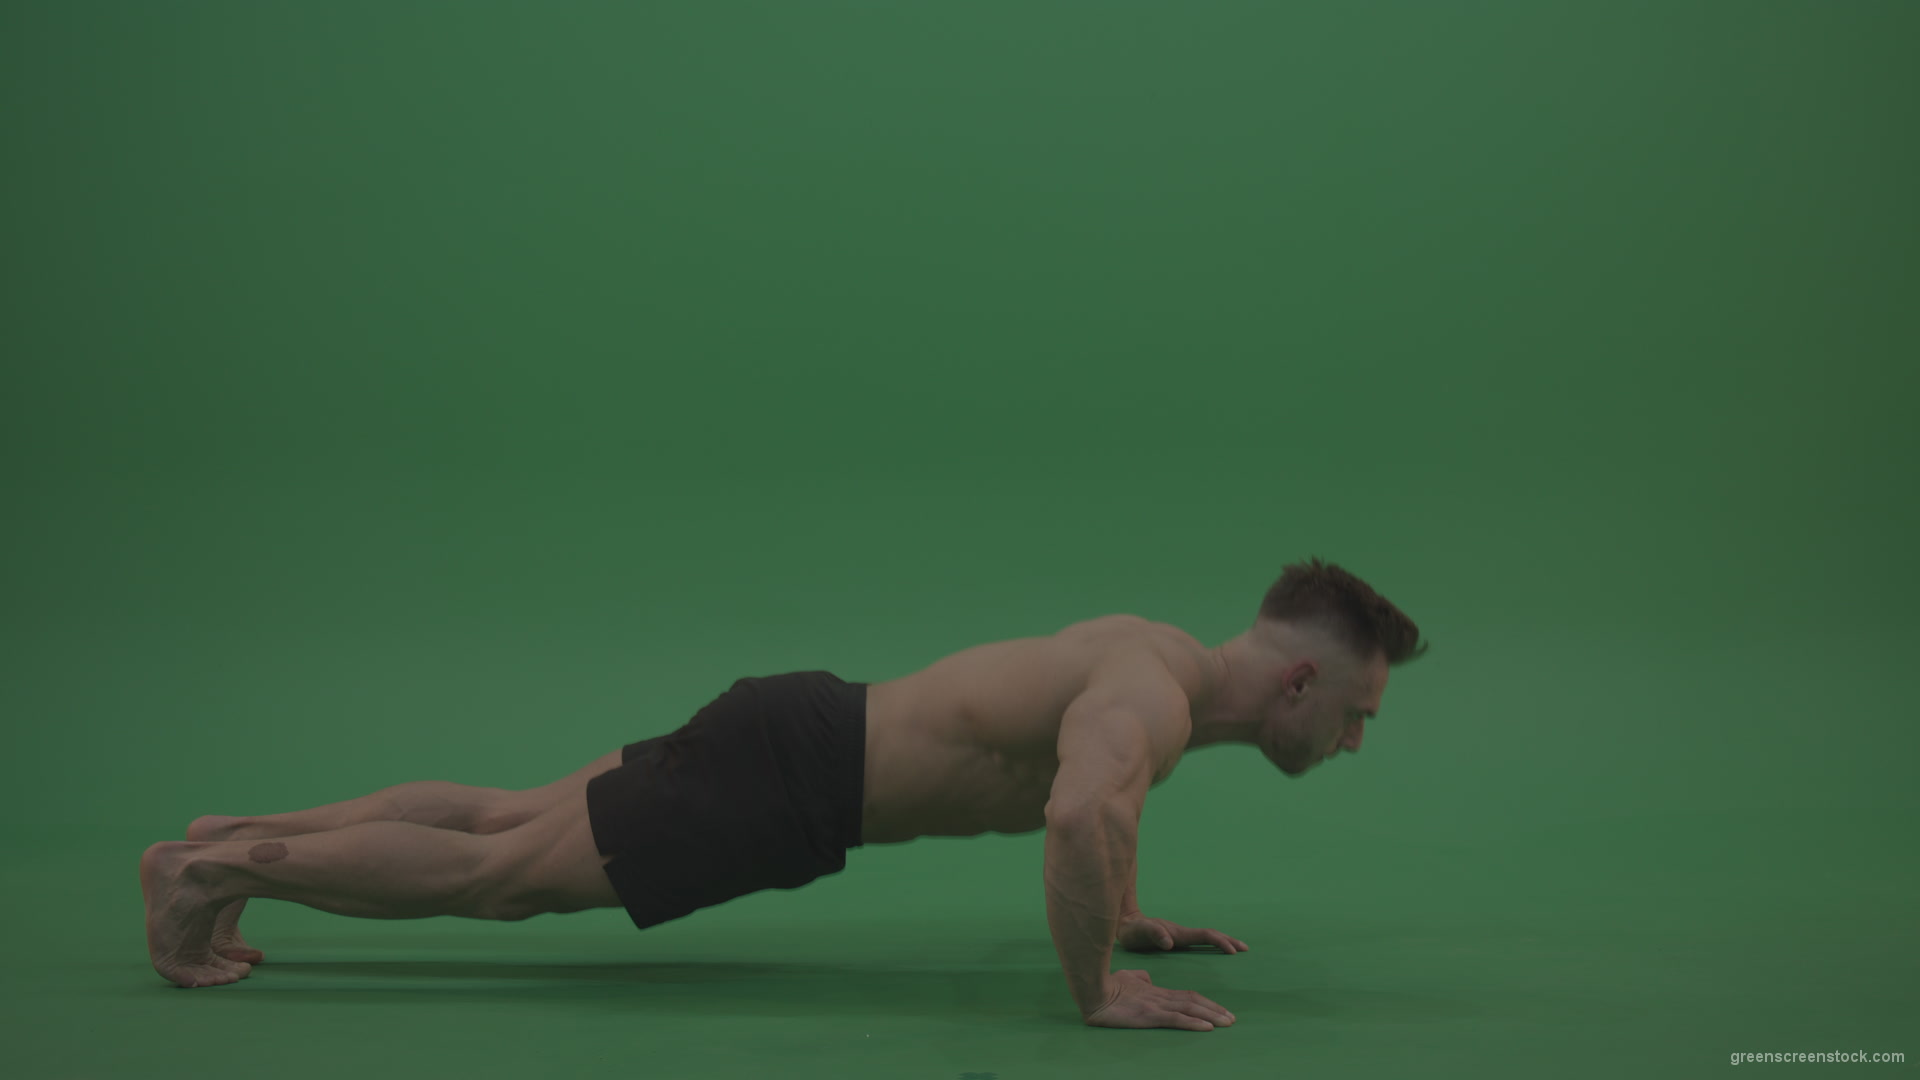 Young_Bodybuilder_Starts_Working_Out_From_Crouching_Terminator_Position_Does_Pull_Ups_Turns_Back_To_The_Start_Position_On_Green_Screen_Wall_Background_006 Green Screen Stock